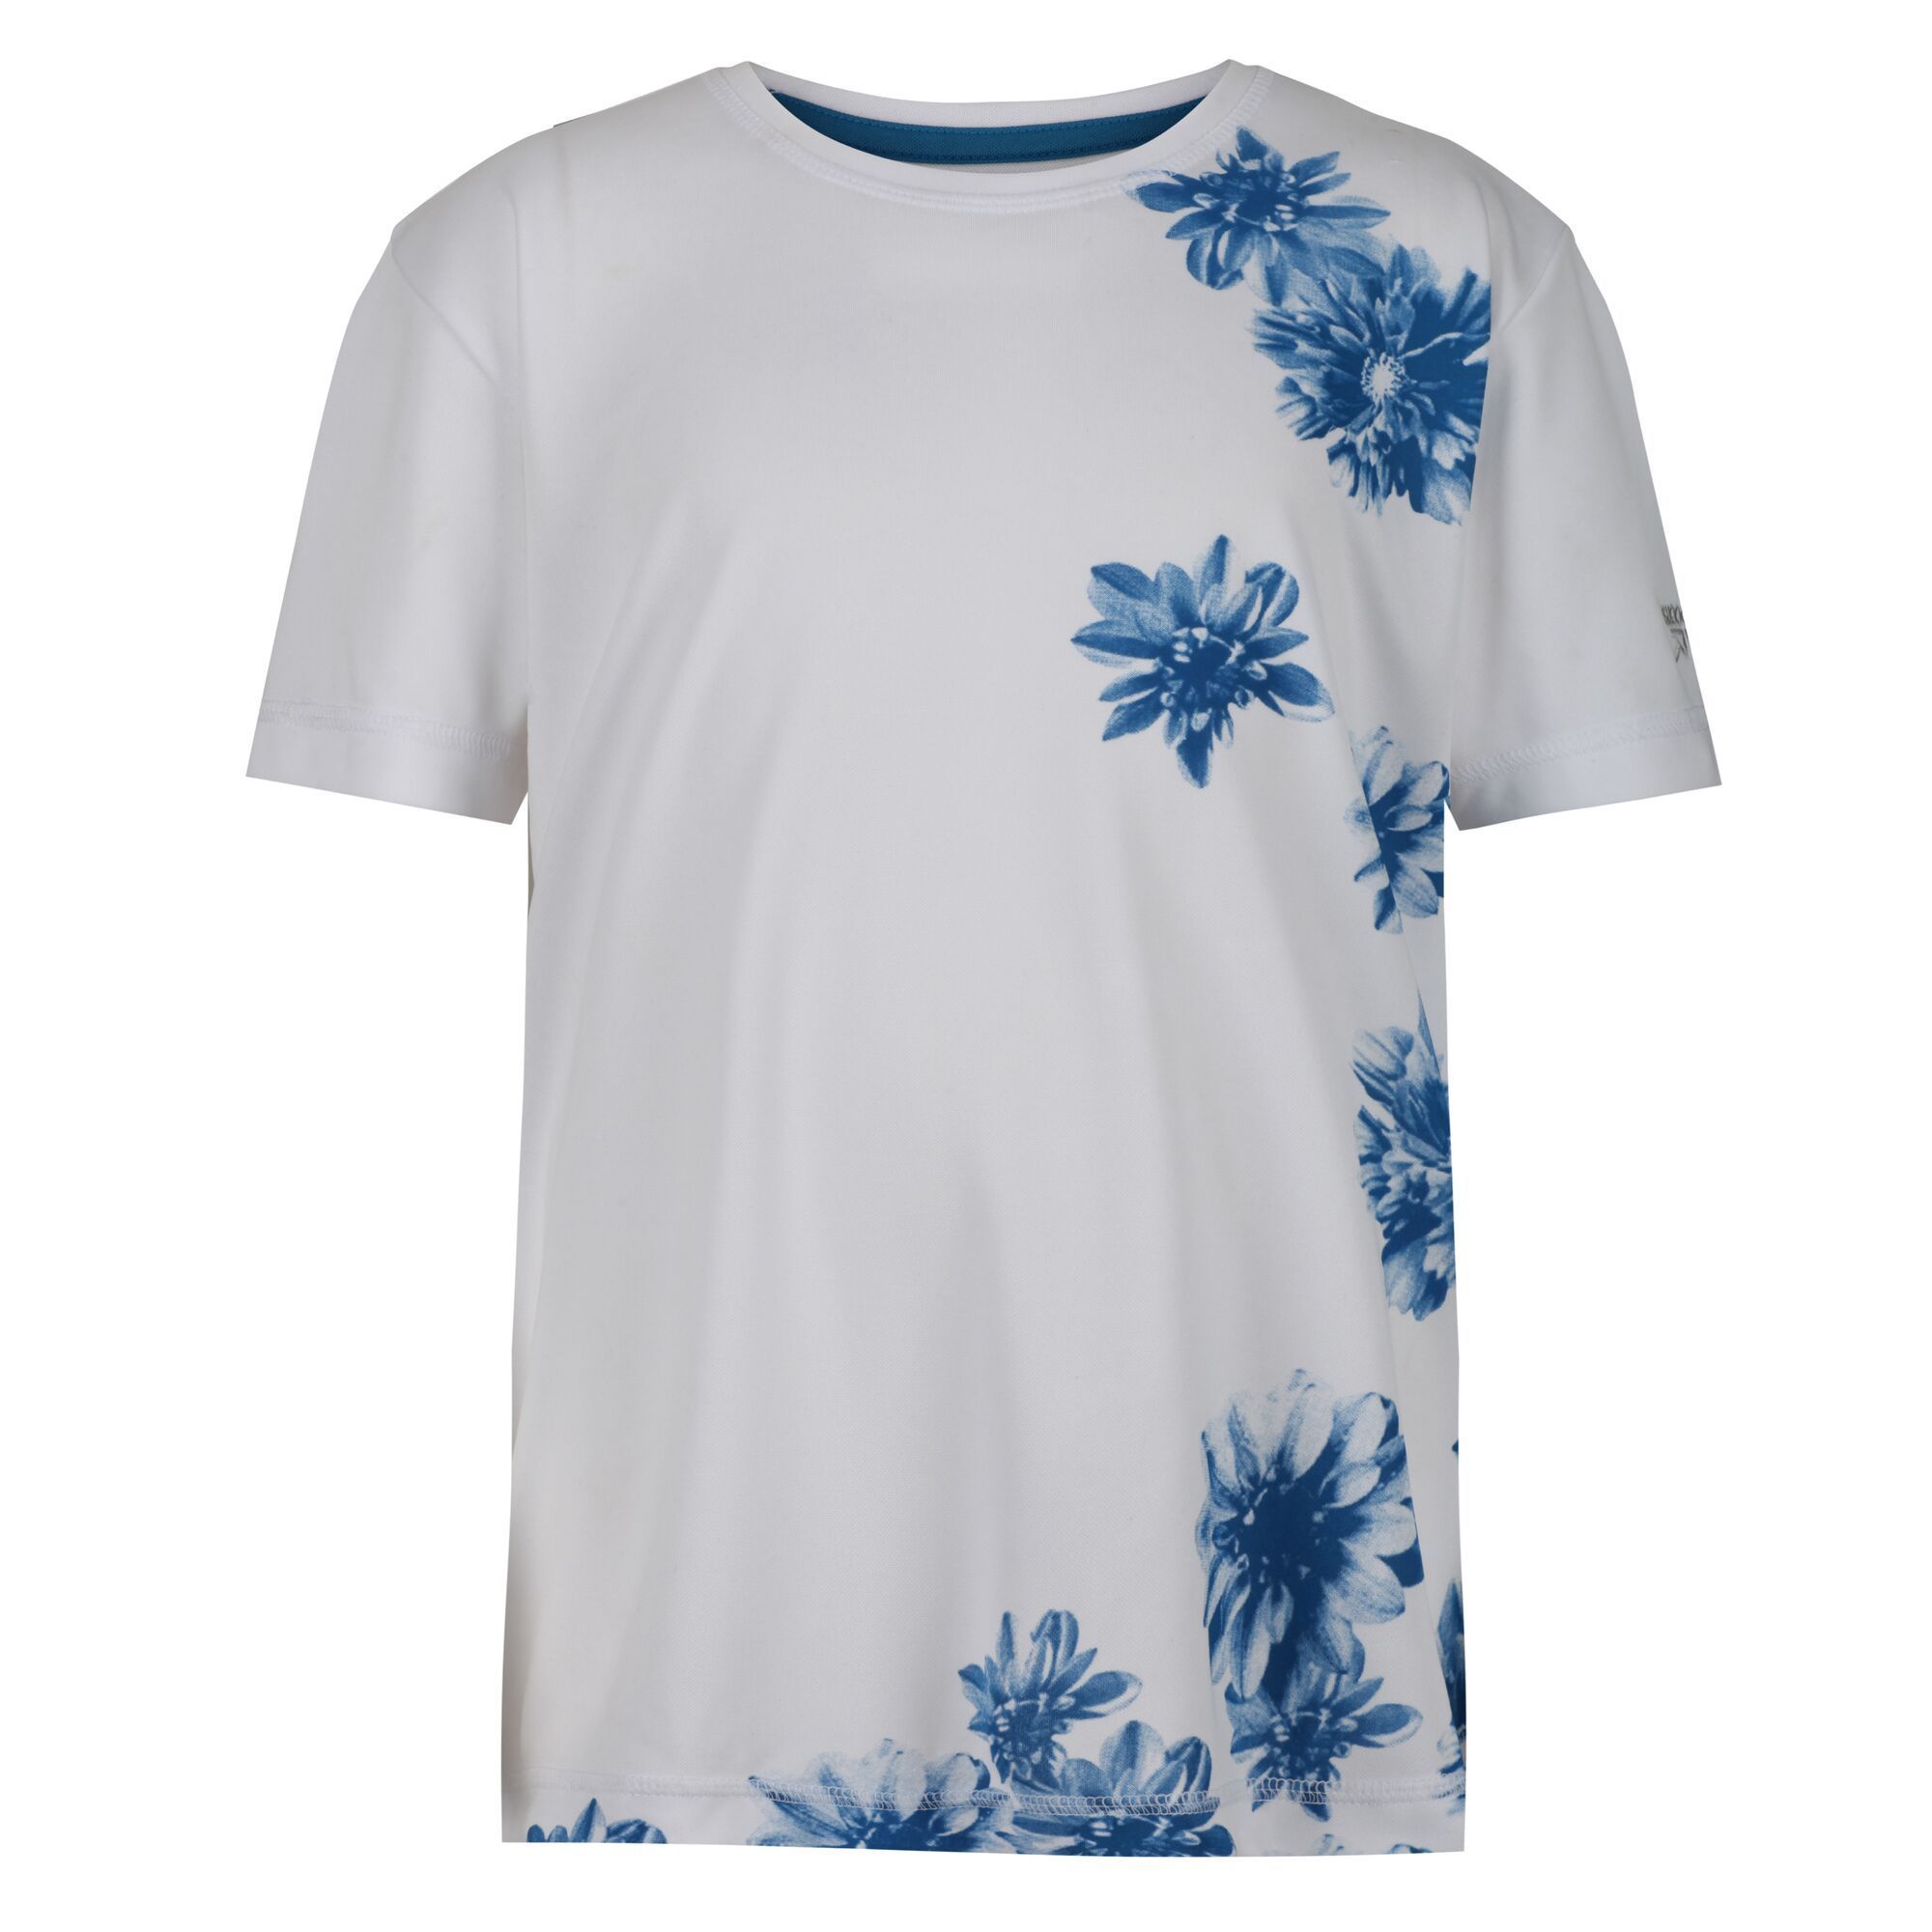 Material: 100% Polyester. Breathable and durable t shirt with moisture-wicking performance. Quick dry fabric. Features an adventure inspired graphic print on the chest and the Regatta logo on the left sleeve.